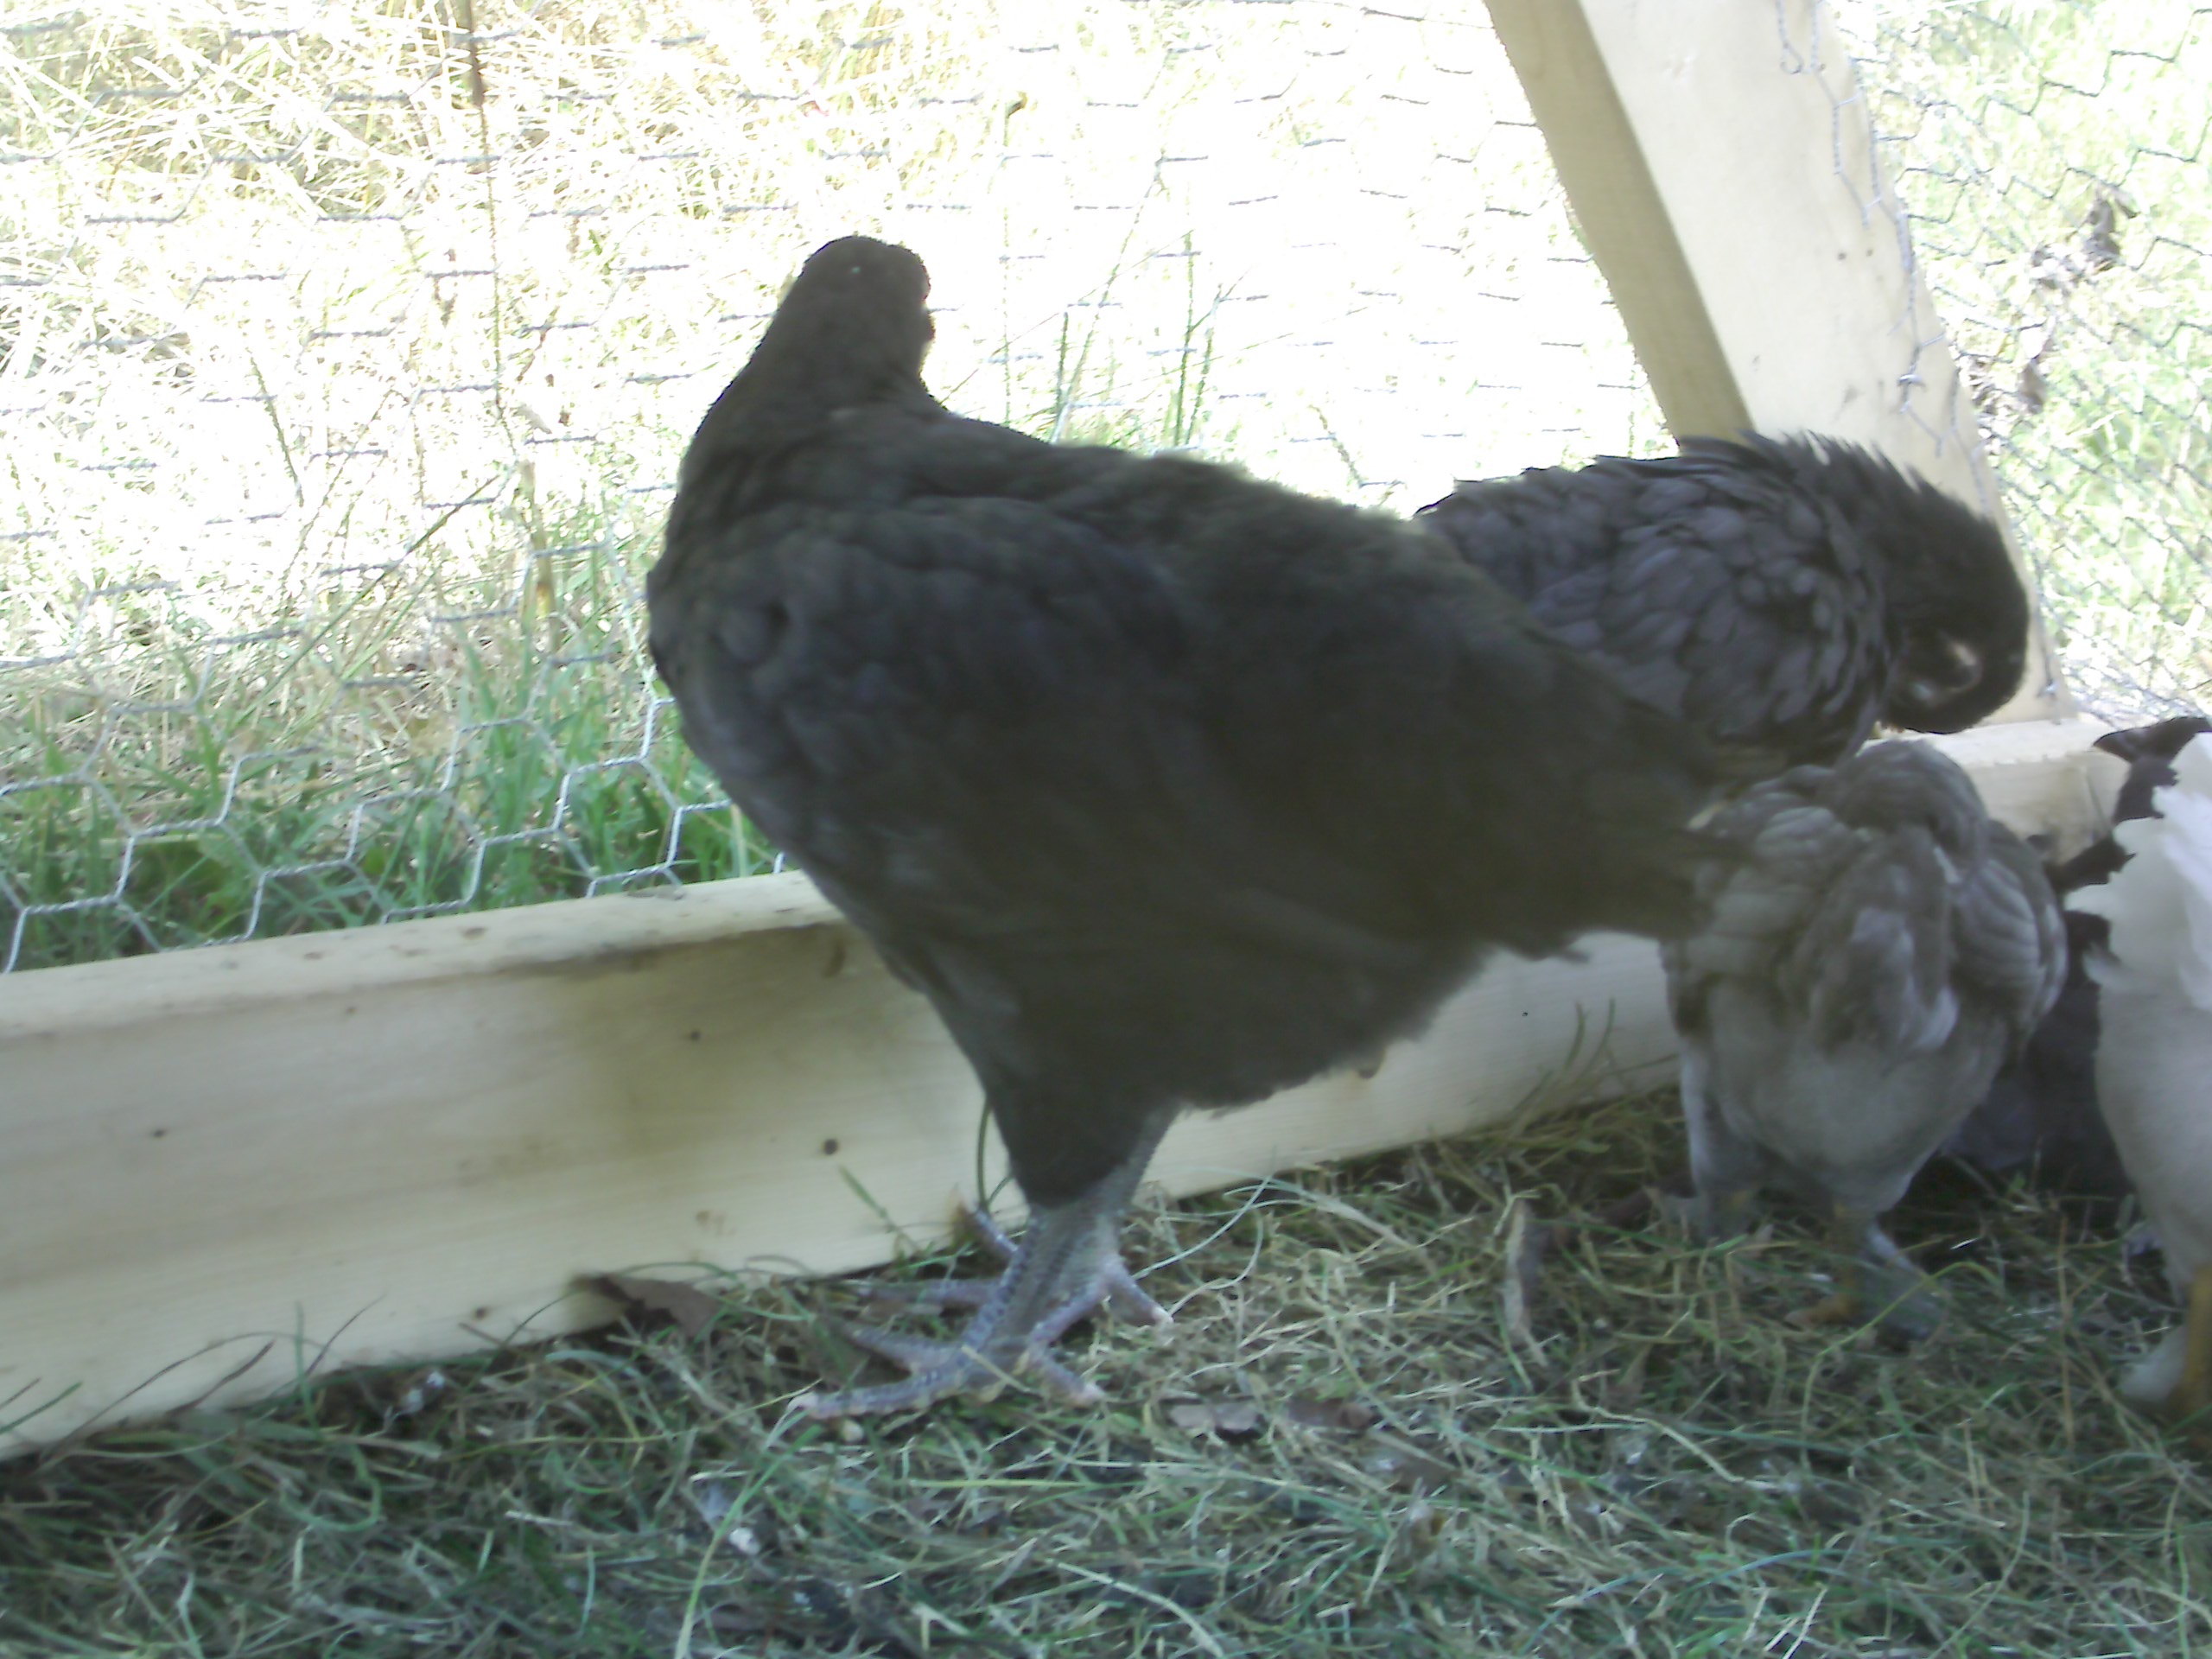 That's 1 of our many black Hens! : )